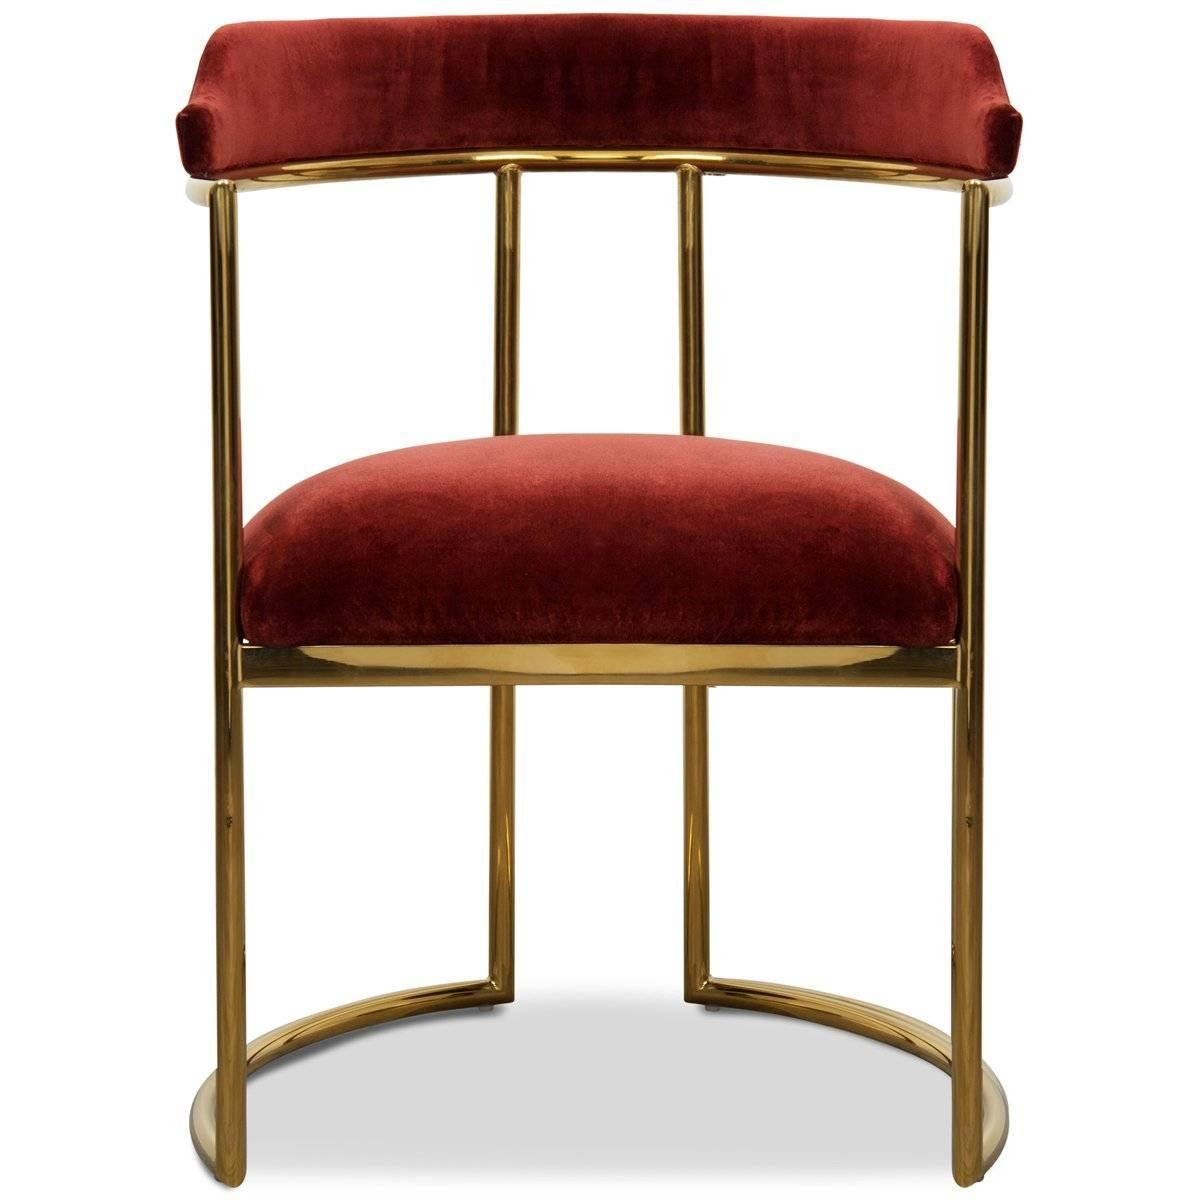 Meet the Acapulco 2 dining chair, the newest version of the popular Acapulco dining chair. As the perfect accent for your modern dining room, the Acapulco 2 is upholstered in your choice of colored velvet with beautiful curved brass legs and a